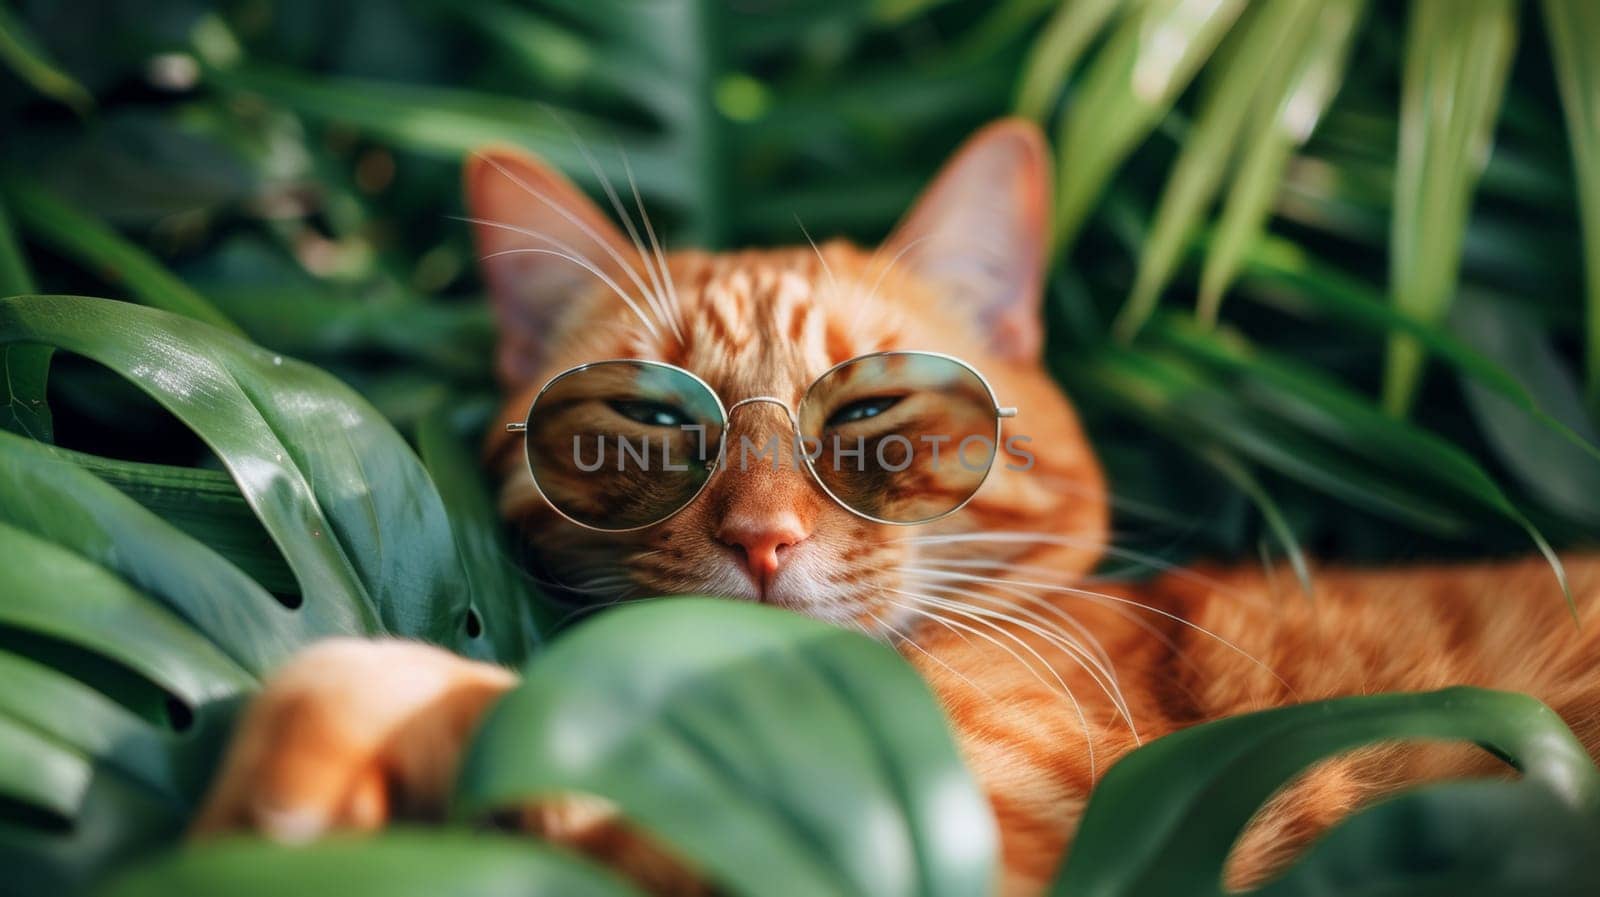 A cat wearing sunglasses laying in a green leafy plant, AI by starush